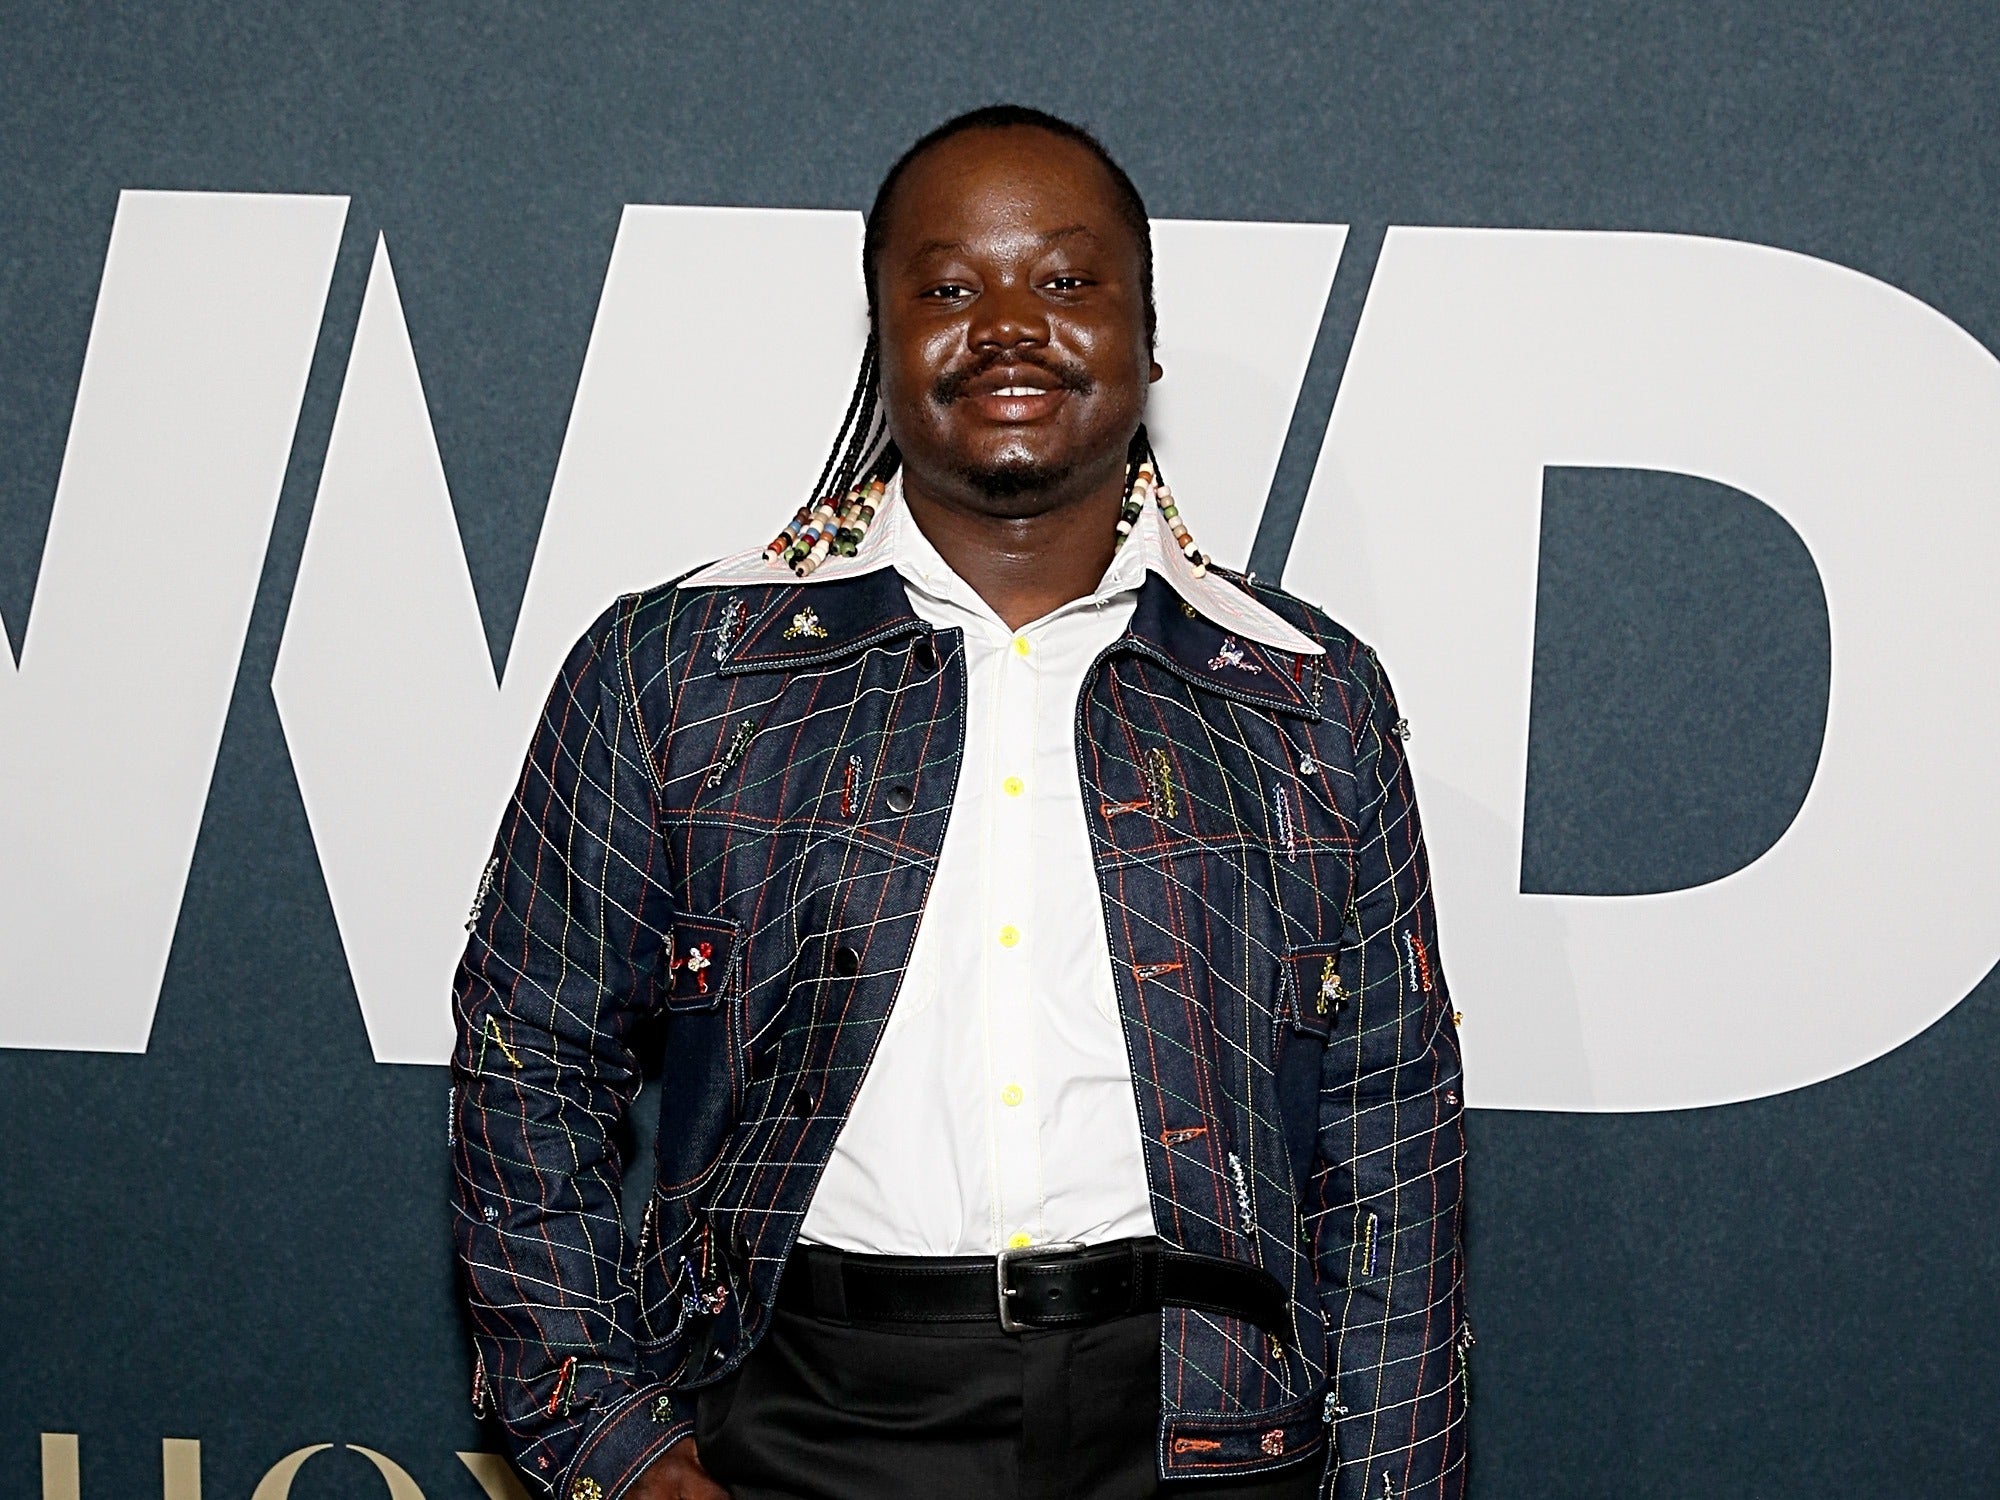 Designer Jacques Agbobly Wins WWD’s “One To Watch Award